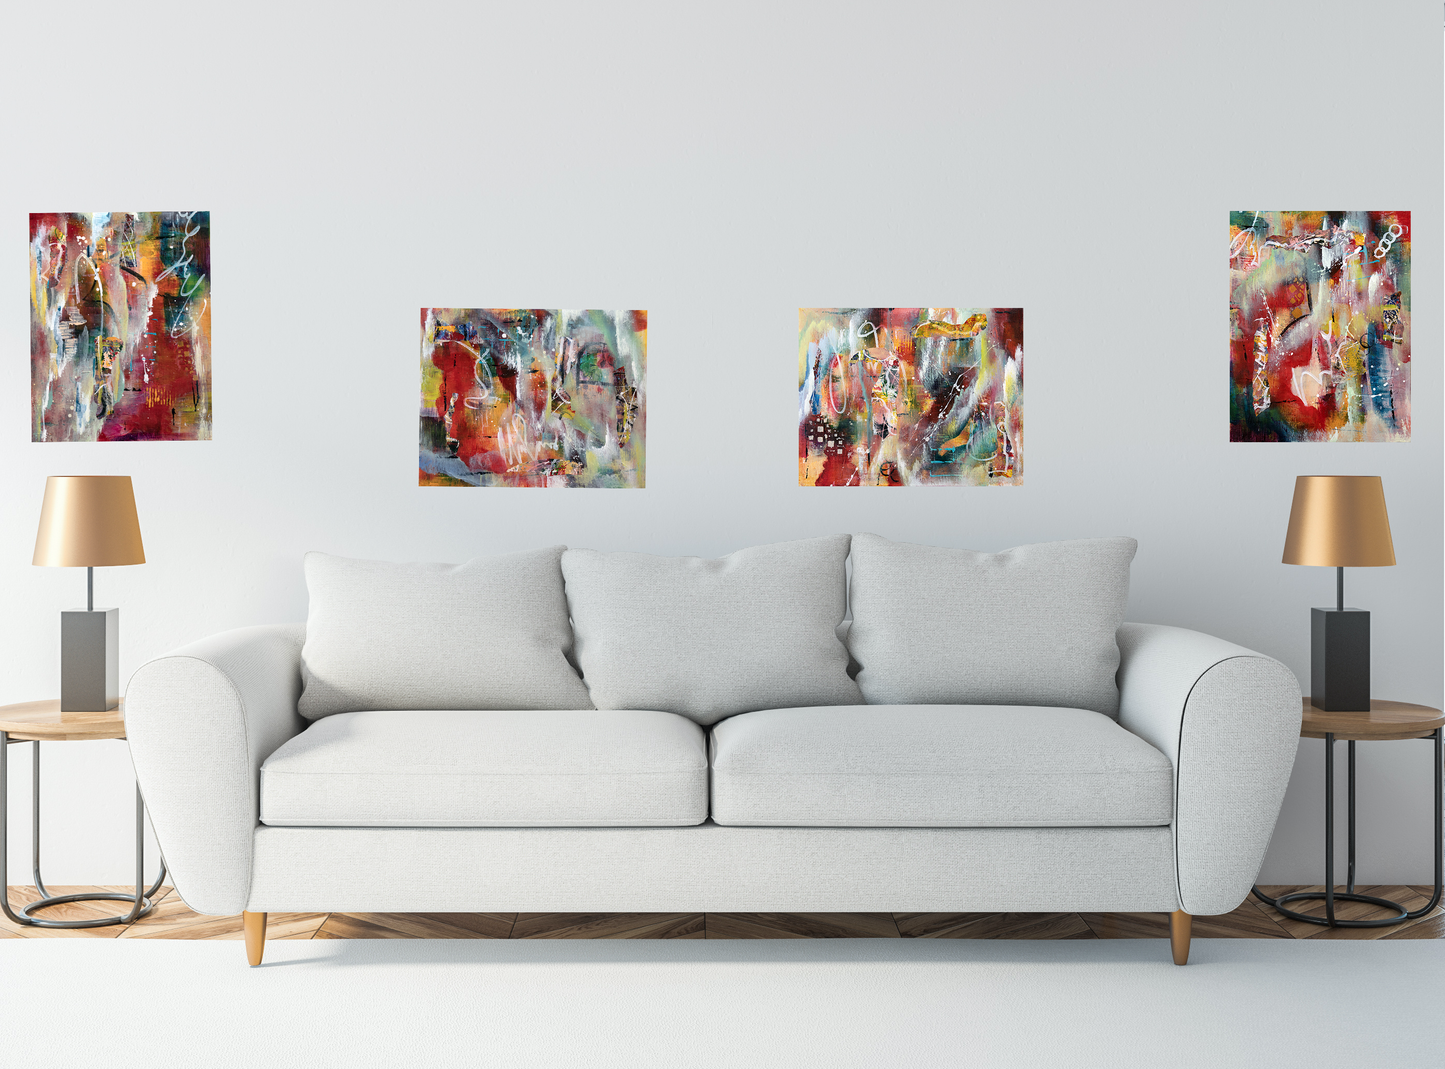 Red Hots #4 - Four Pieces - Sold in Sets of 2 (24x24 Gallery Wrapped Canvas)